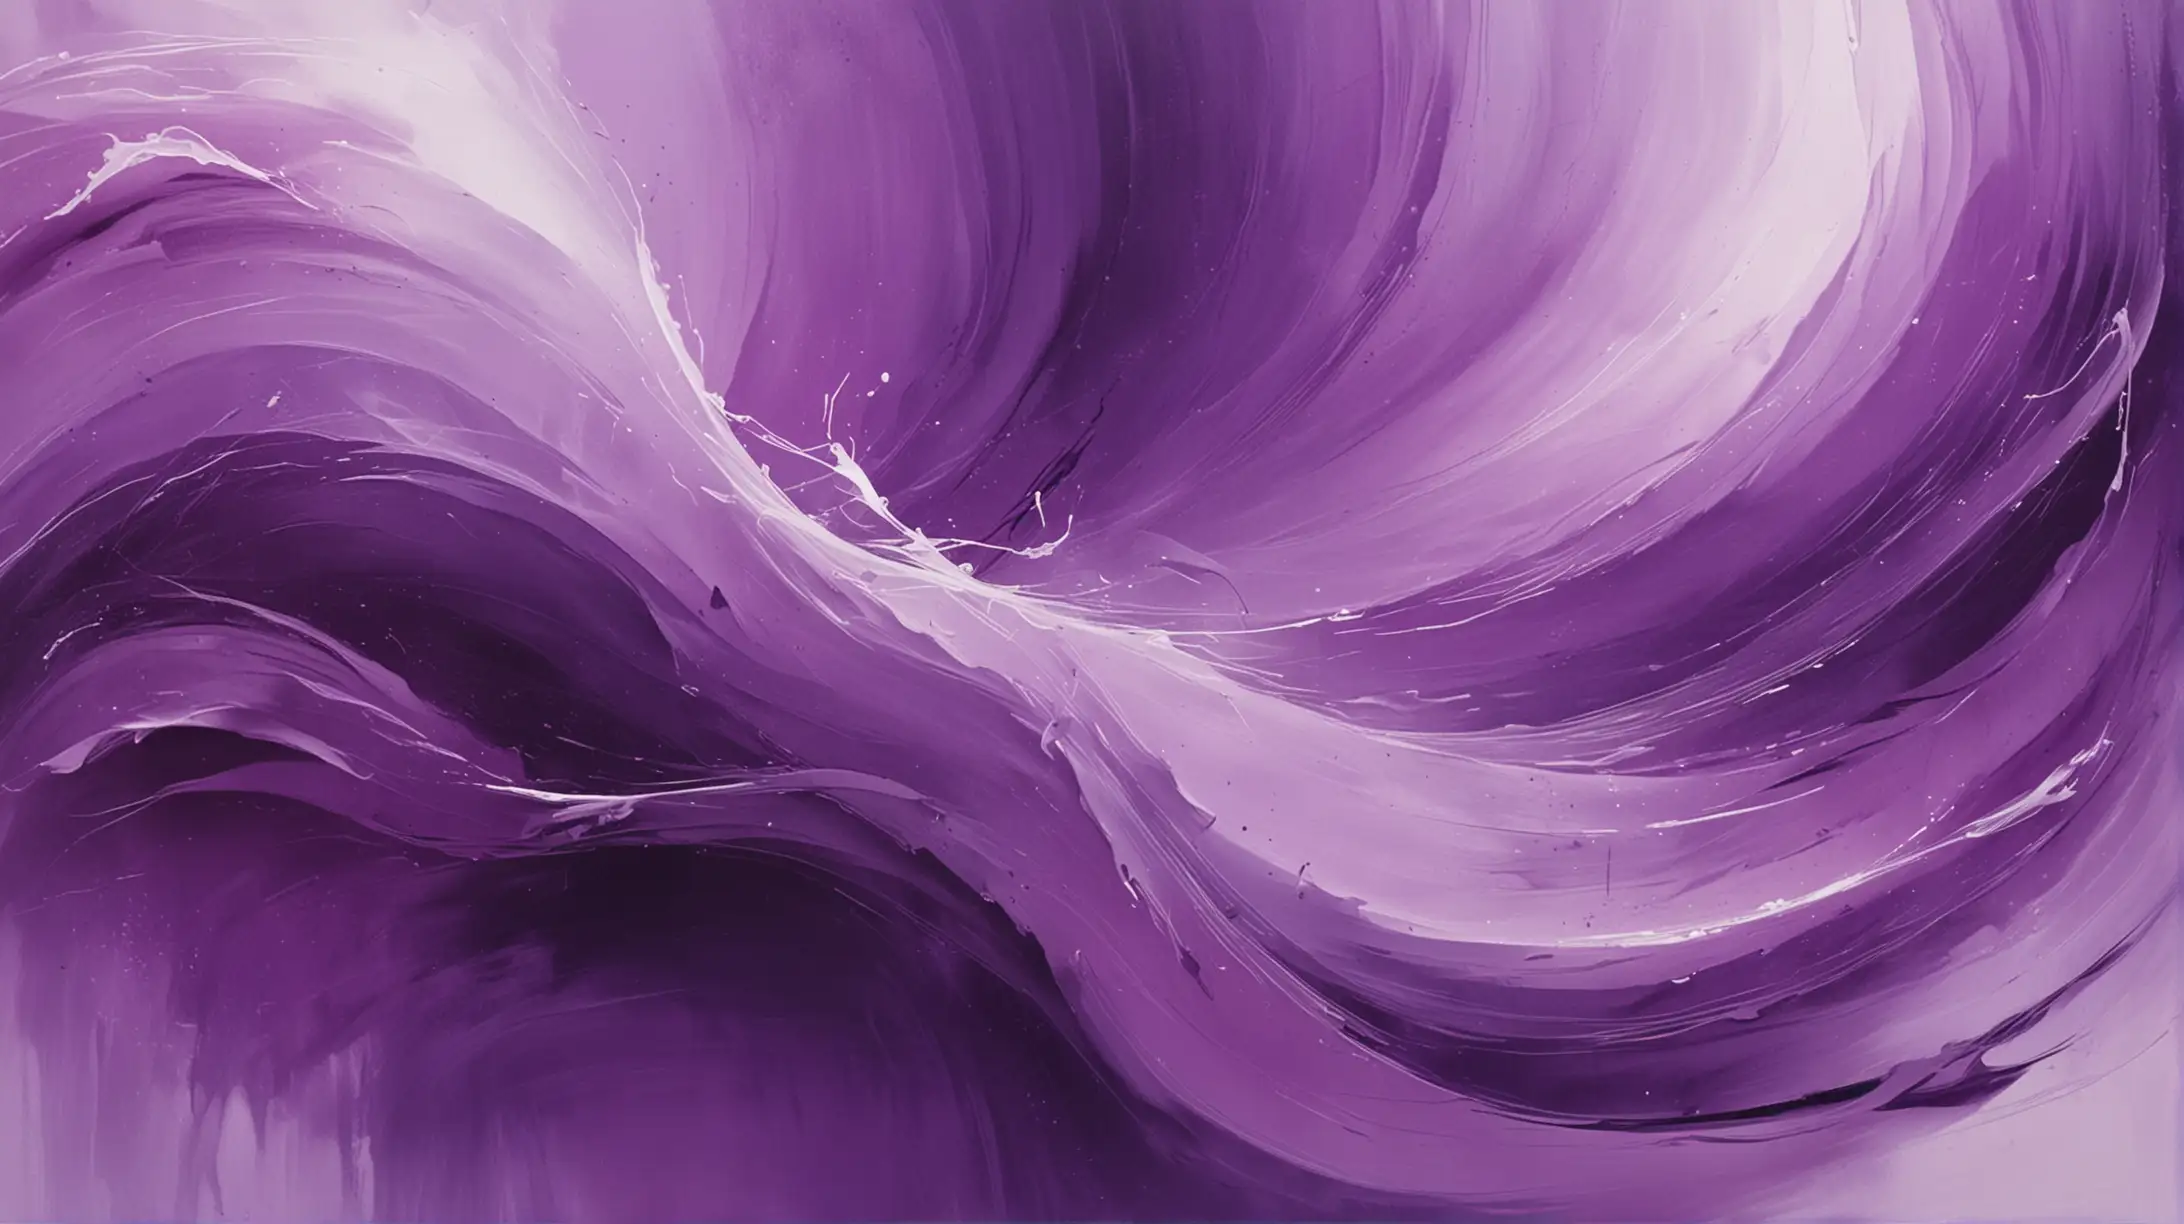 Abstract Purple Painting with Soft Edges and Curves